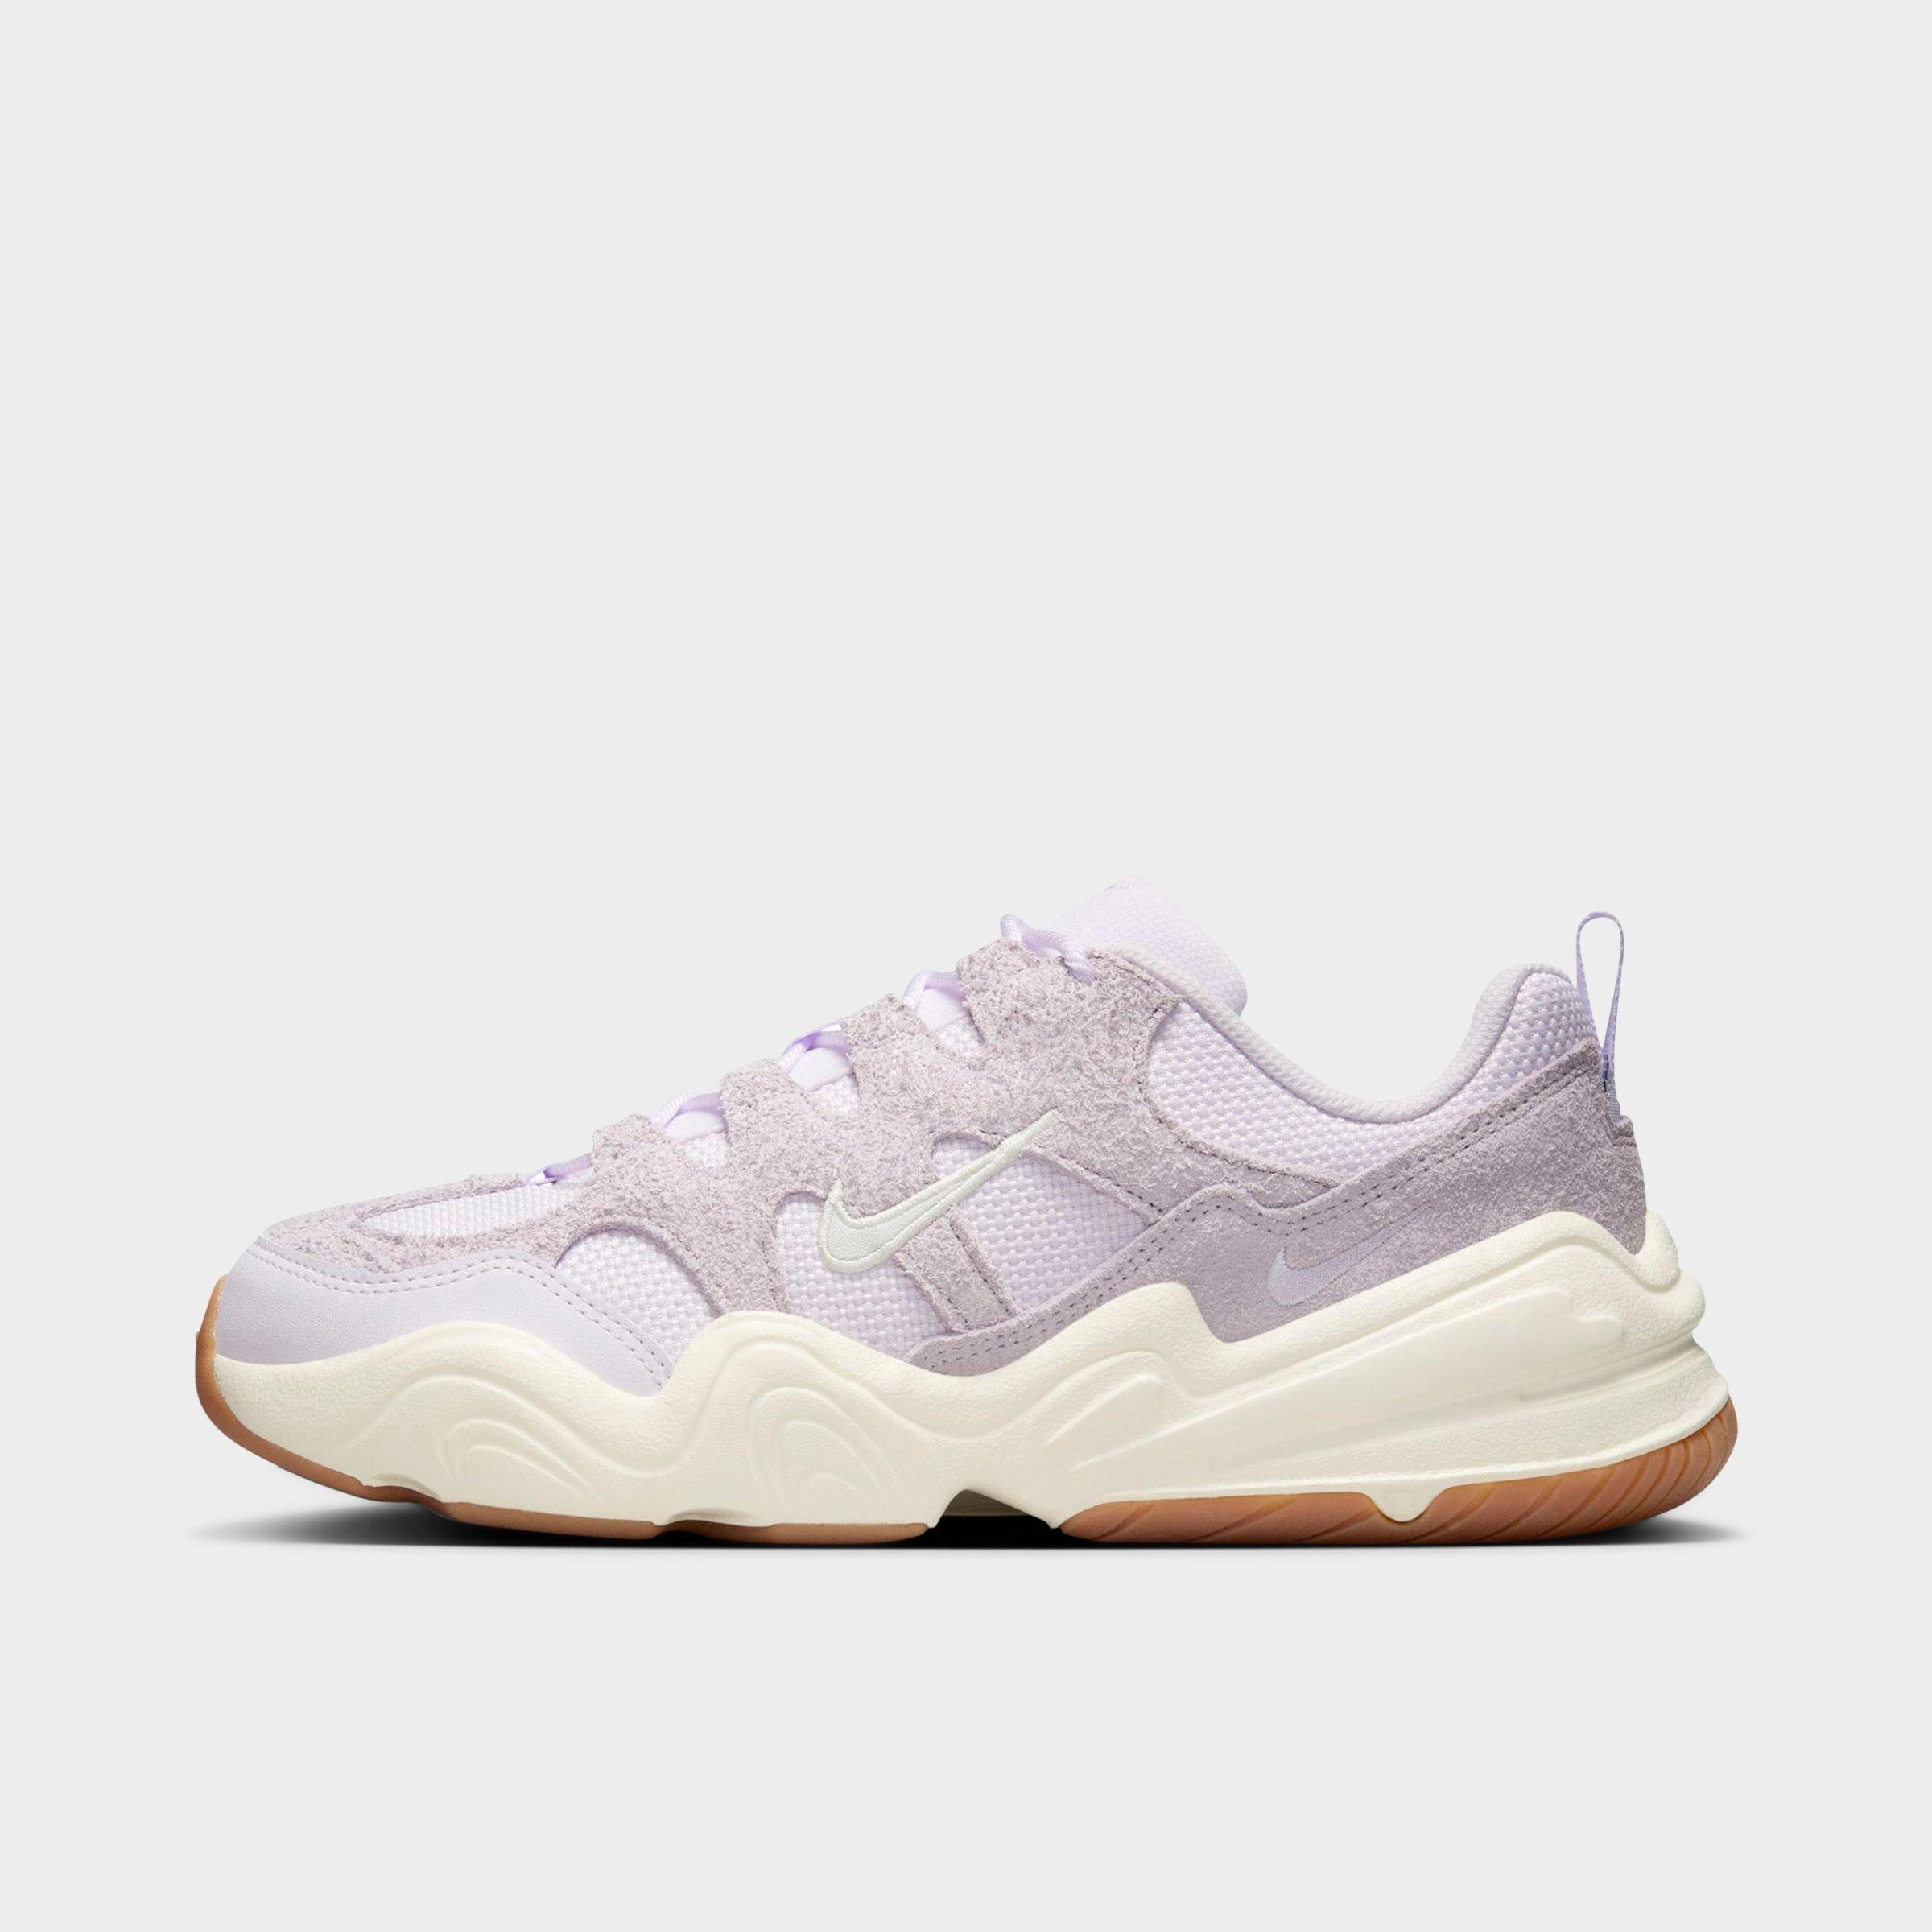 Shop Nike Women's Tech Hera Casual Shoes In Barely Grape/pale Ivory/gum Light Brown/white